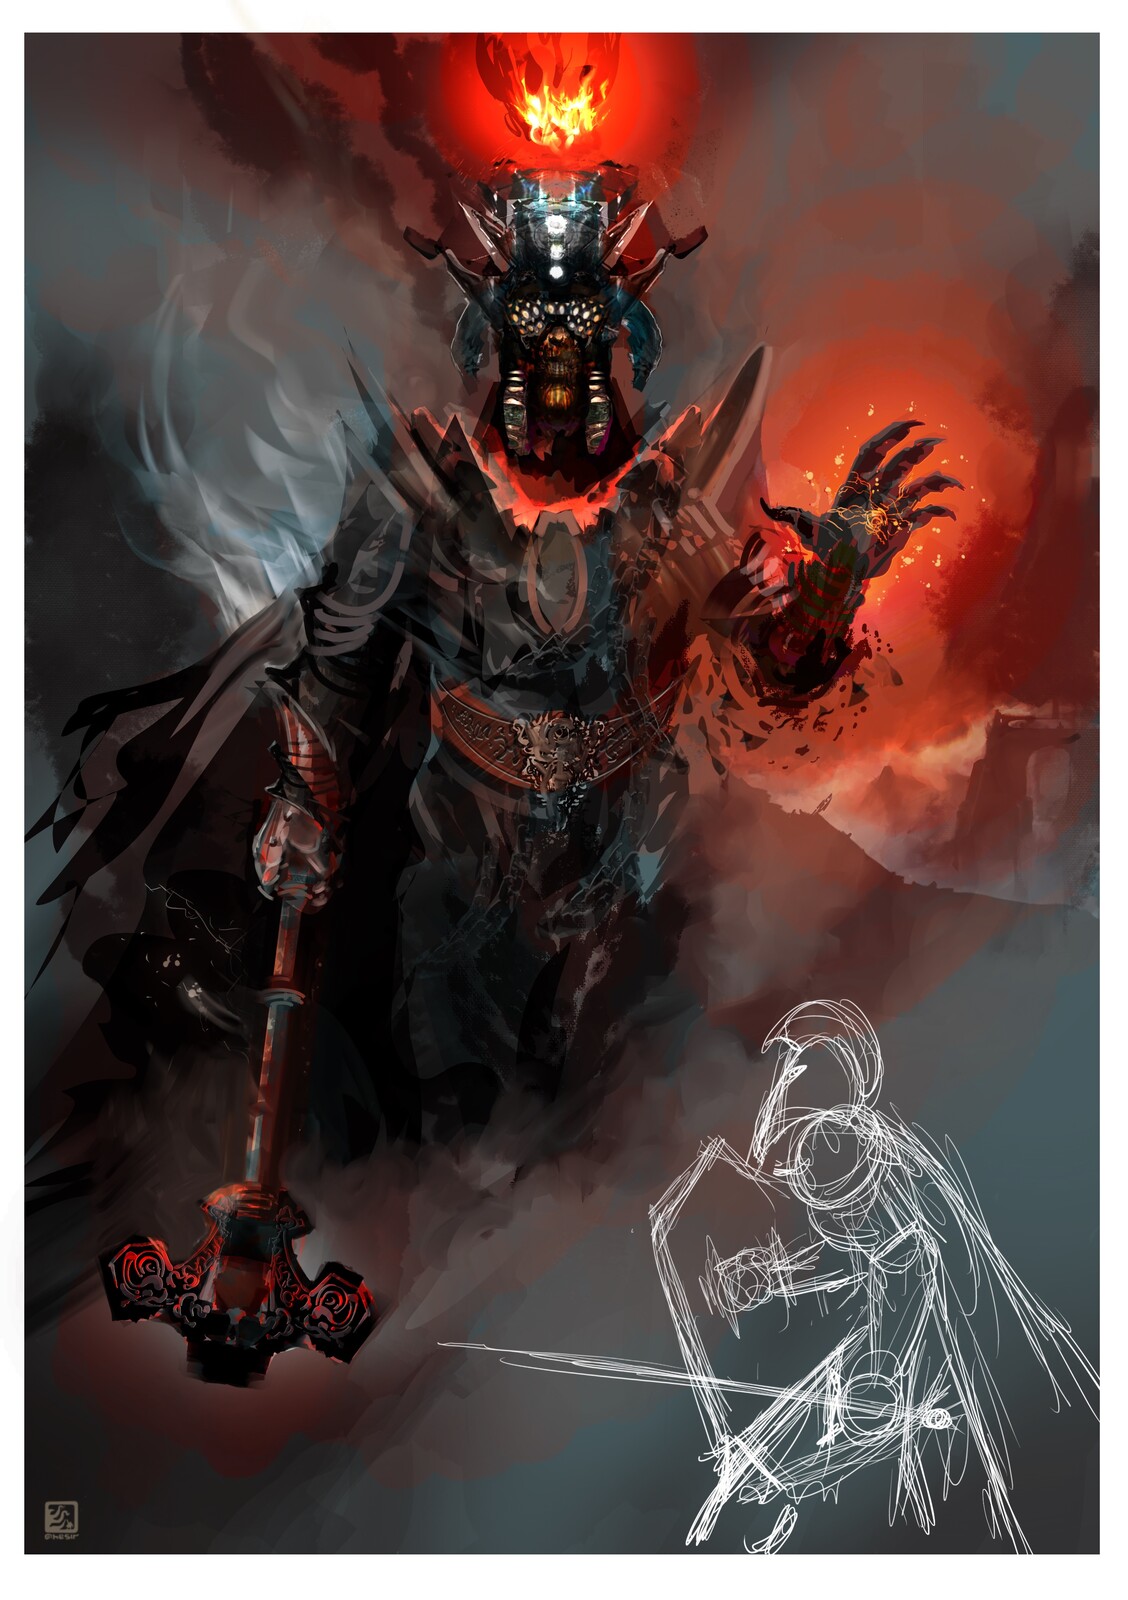 As much as I loved this original pose, particularly that hand showing where the Silmarils had burned Morgoth’s hand I began to feel that he looked more like he was bestowing a benediction on Fingolfin rather than confronting him in battle.